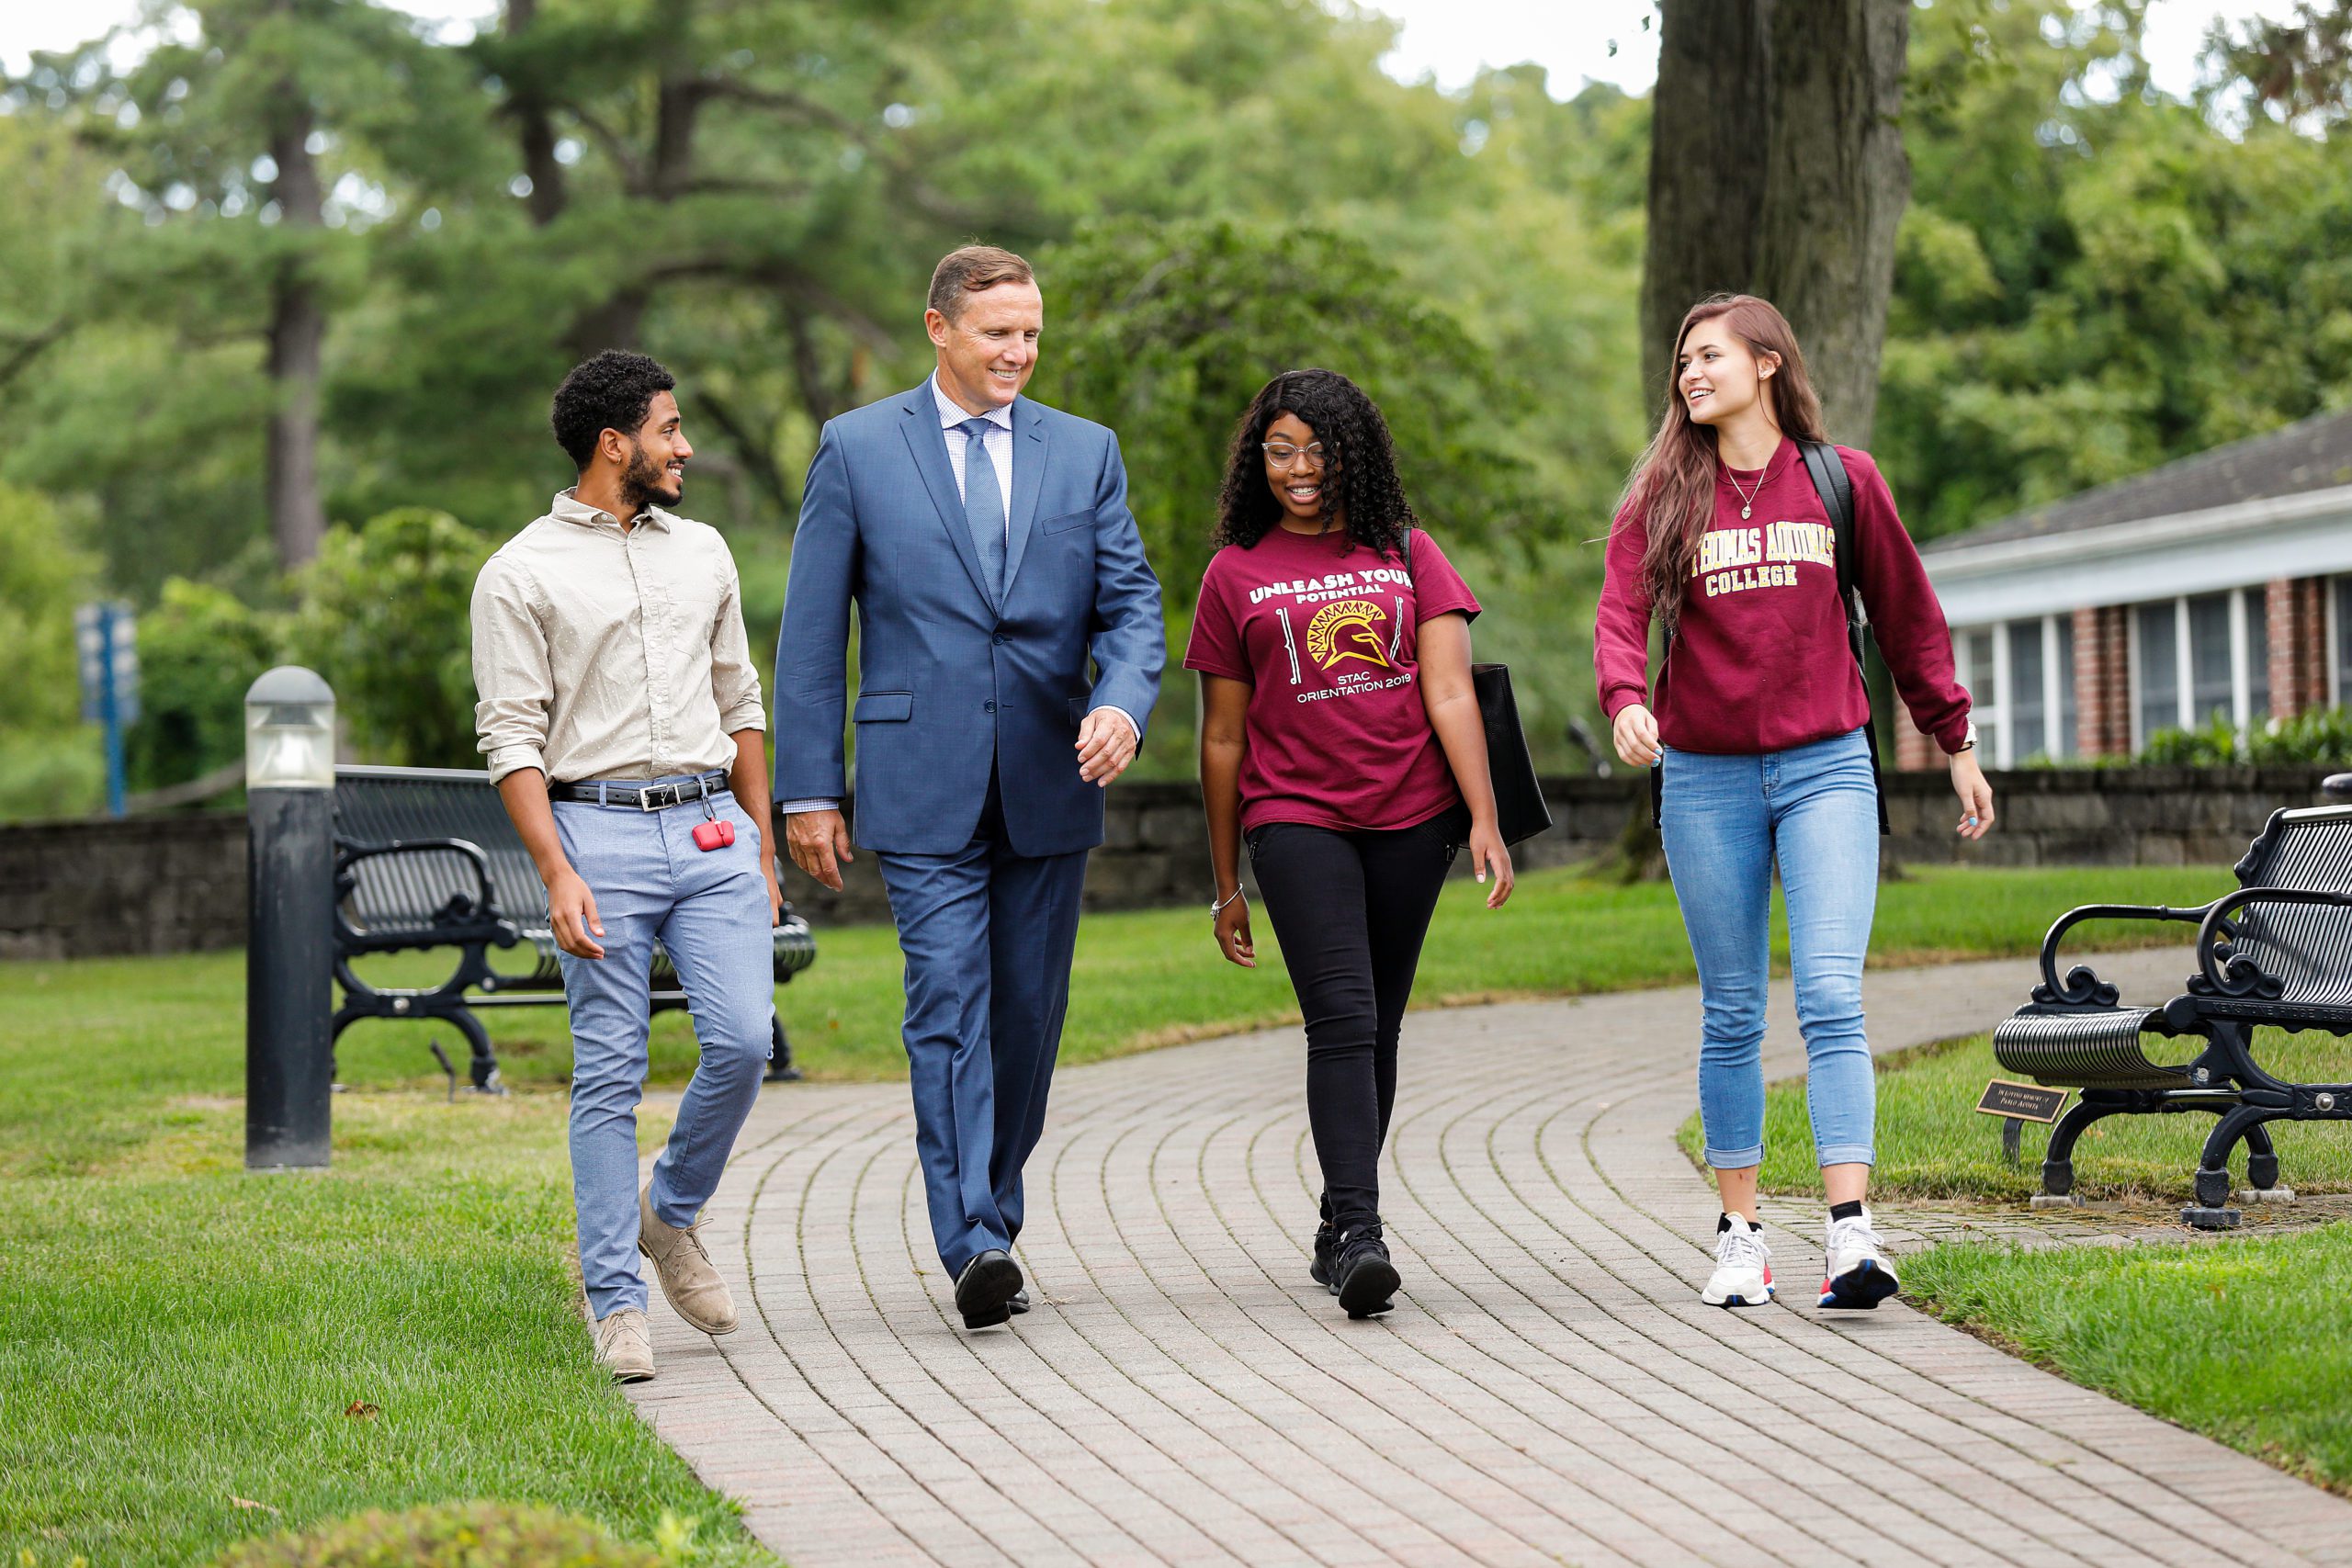 President Daly walking with students